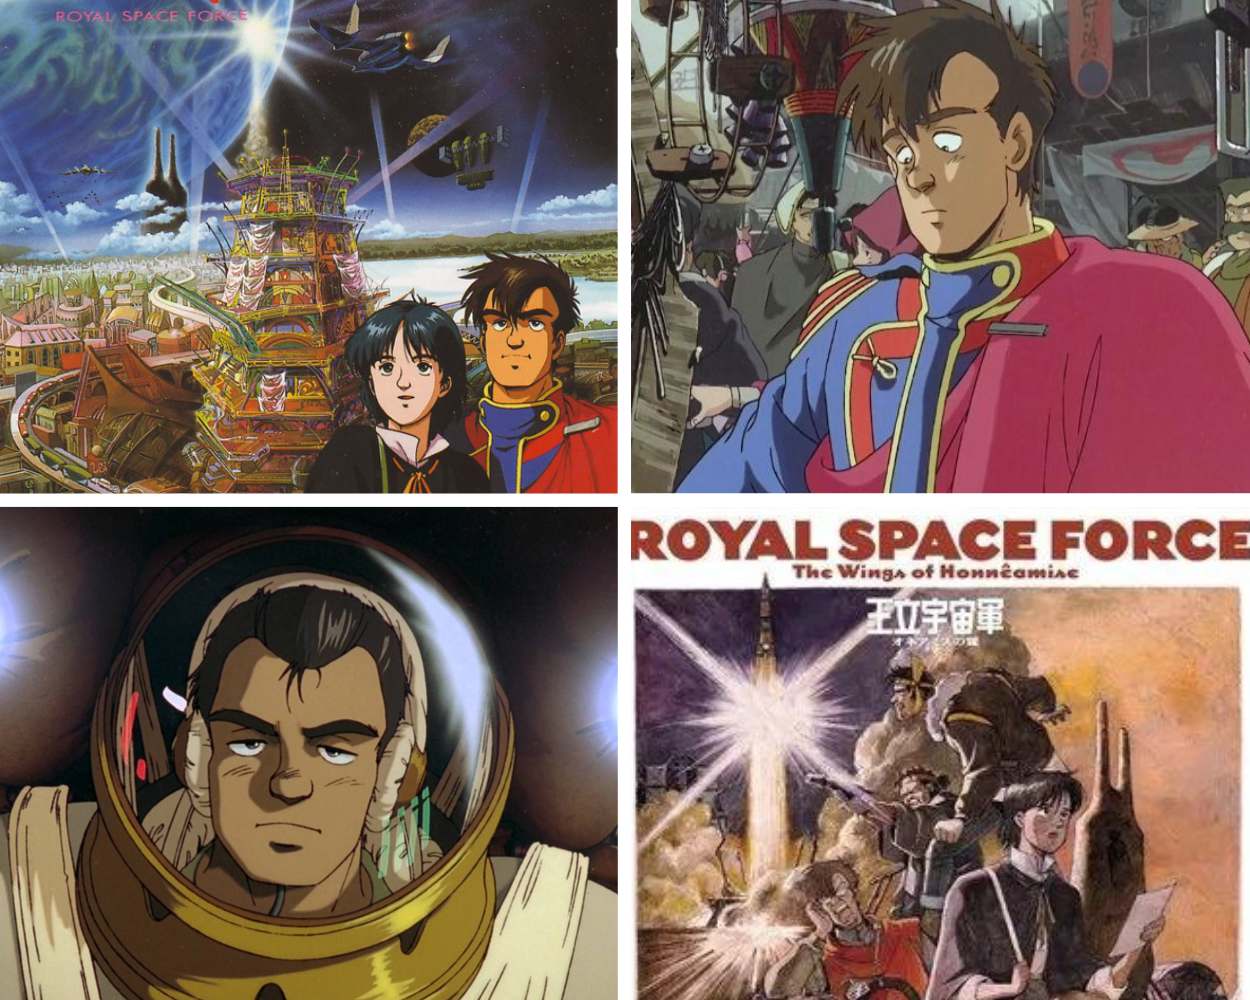 Brutal RRated Anime From the 80s and 90s